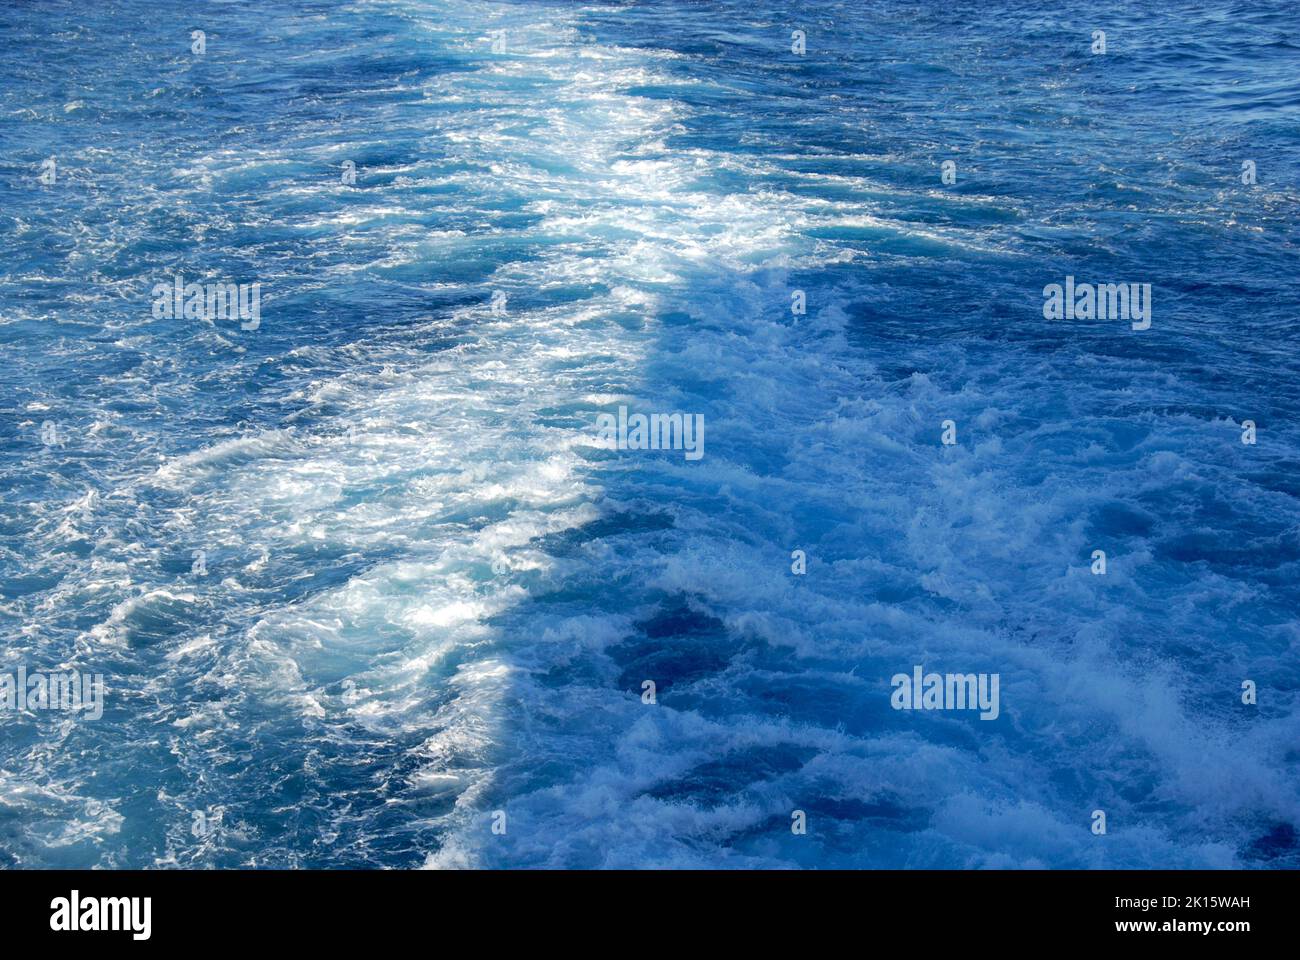 Wash behind cruise liner, with shadow of ship visible, Caribbean Stock Photo